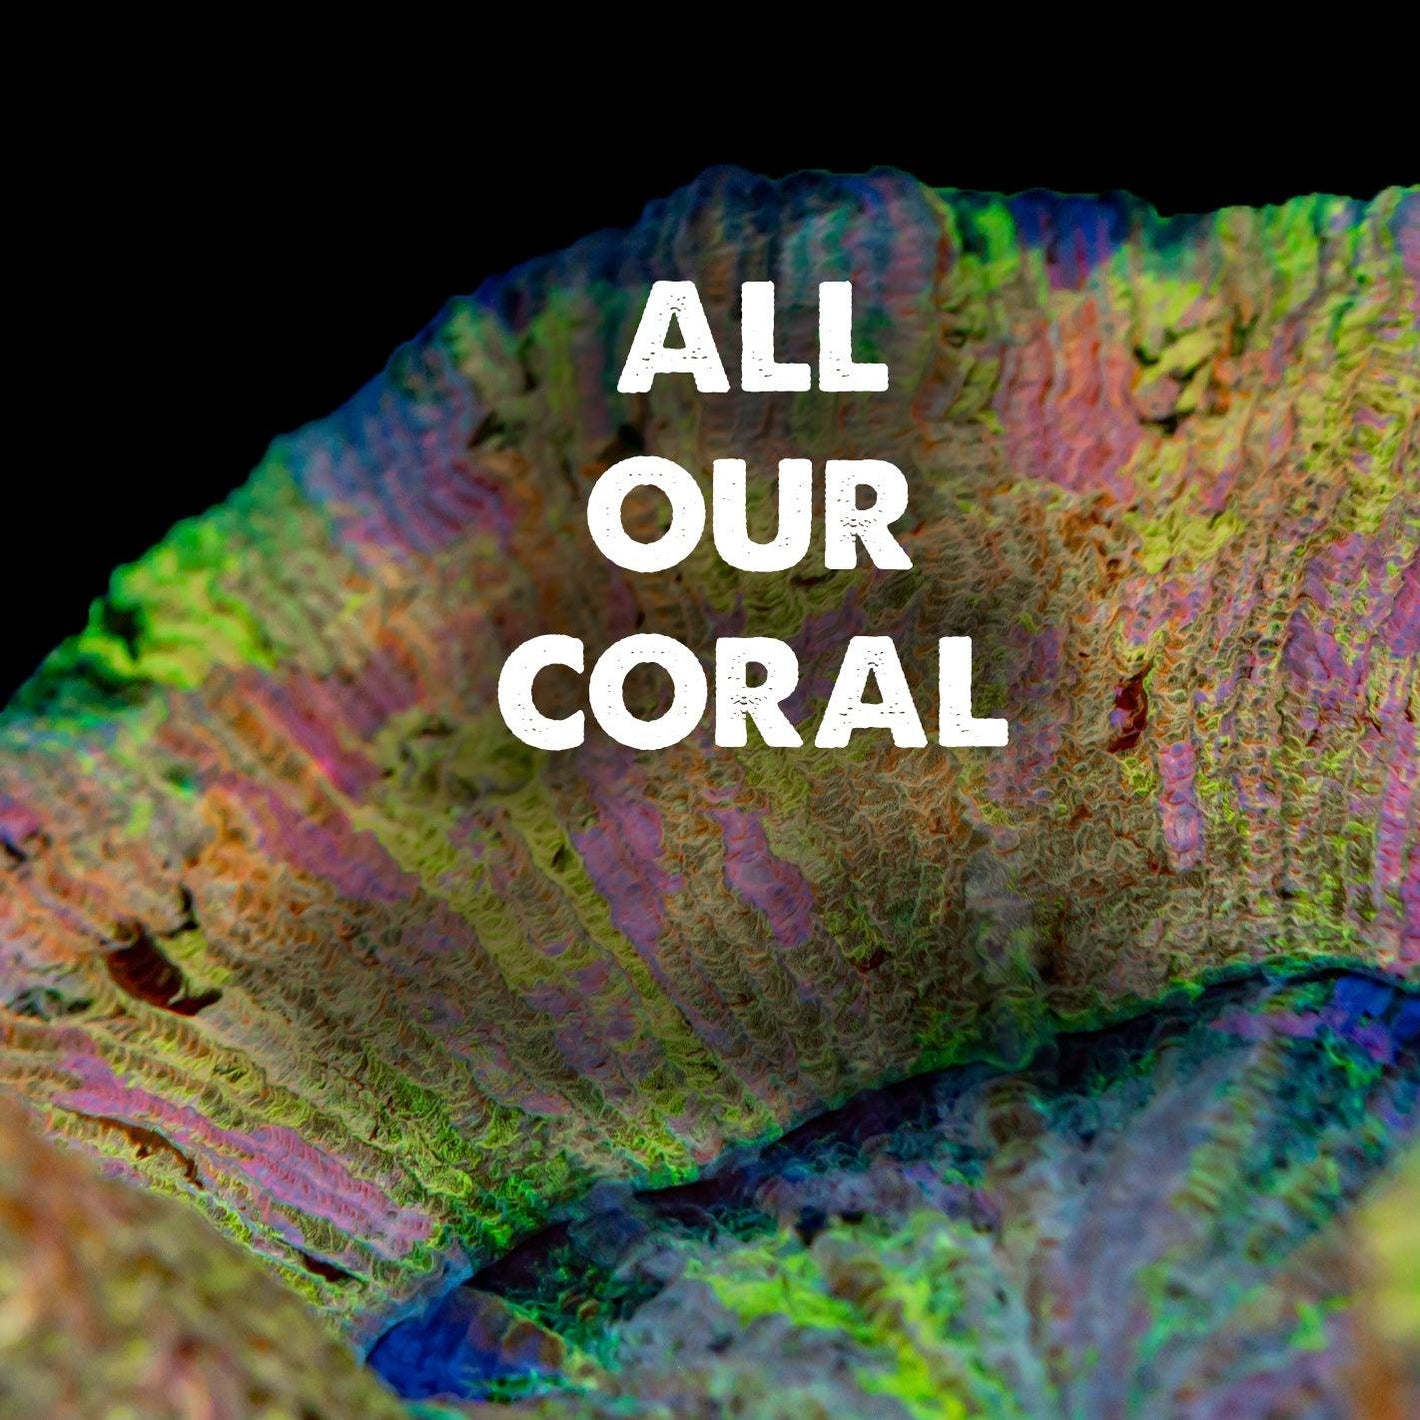 All our coral